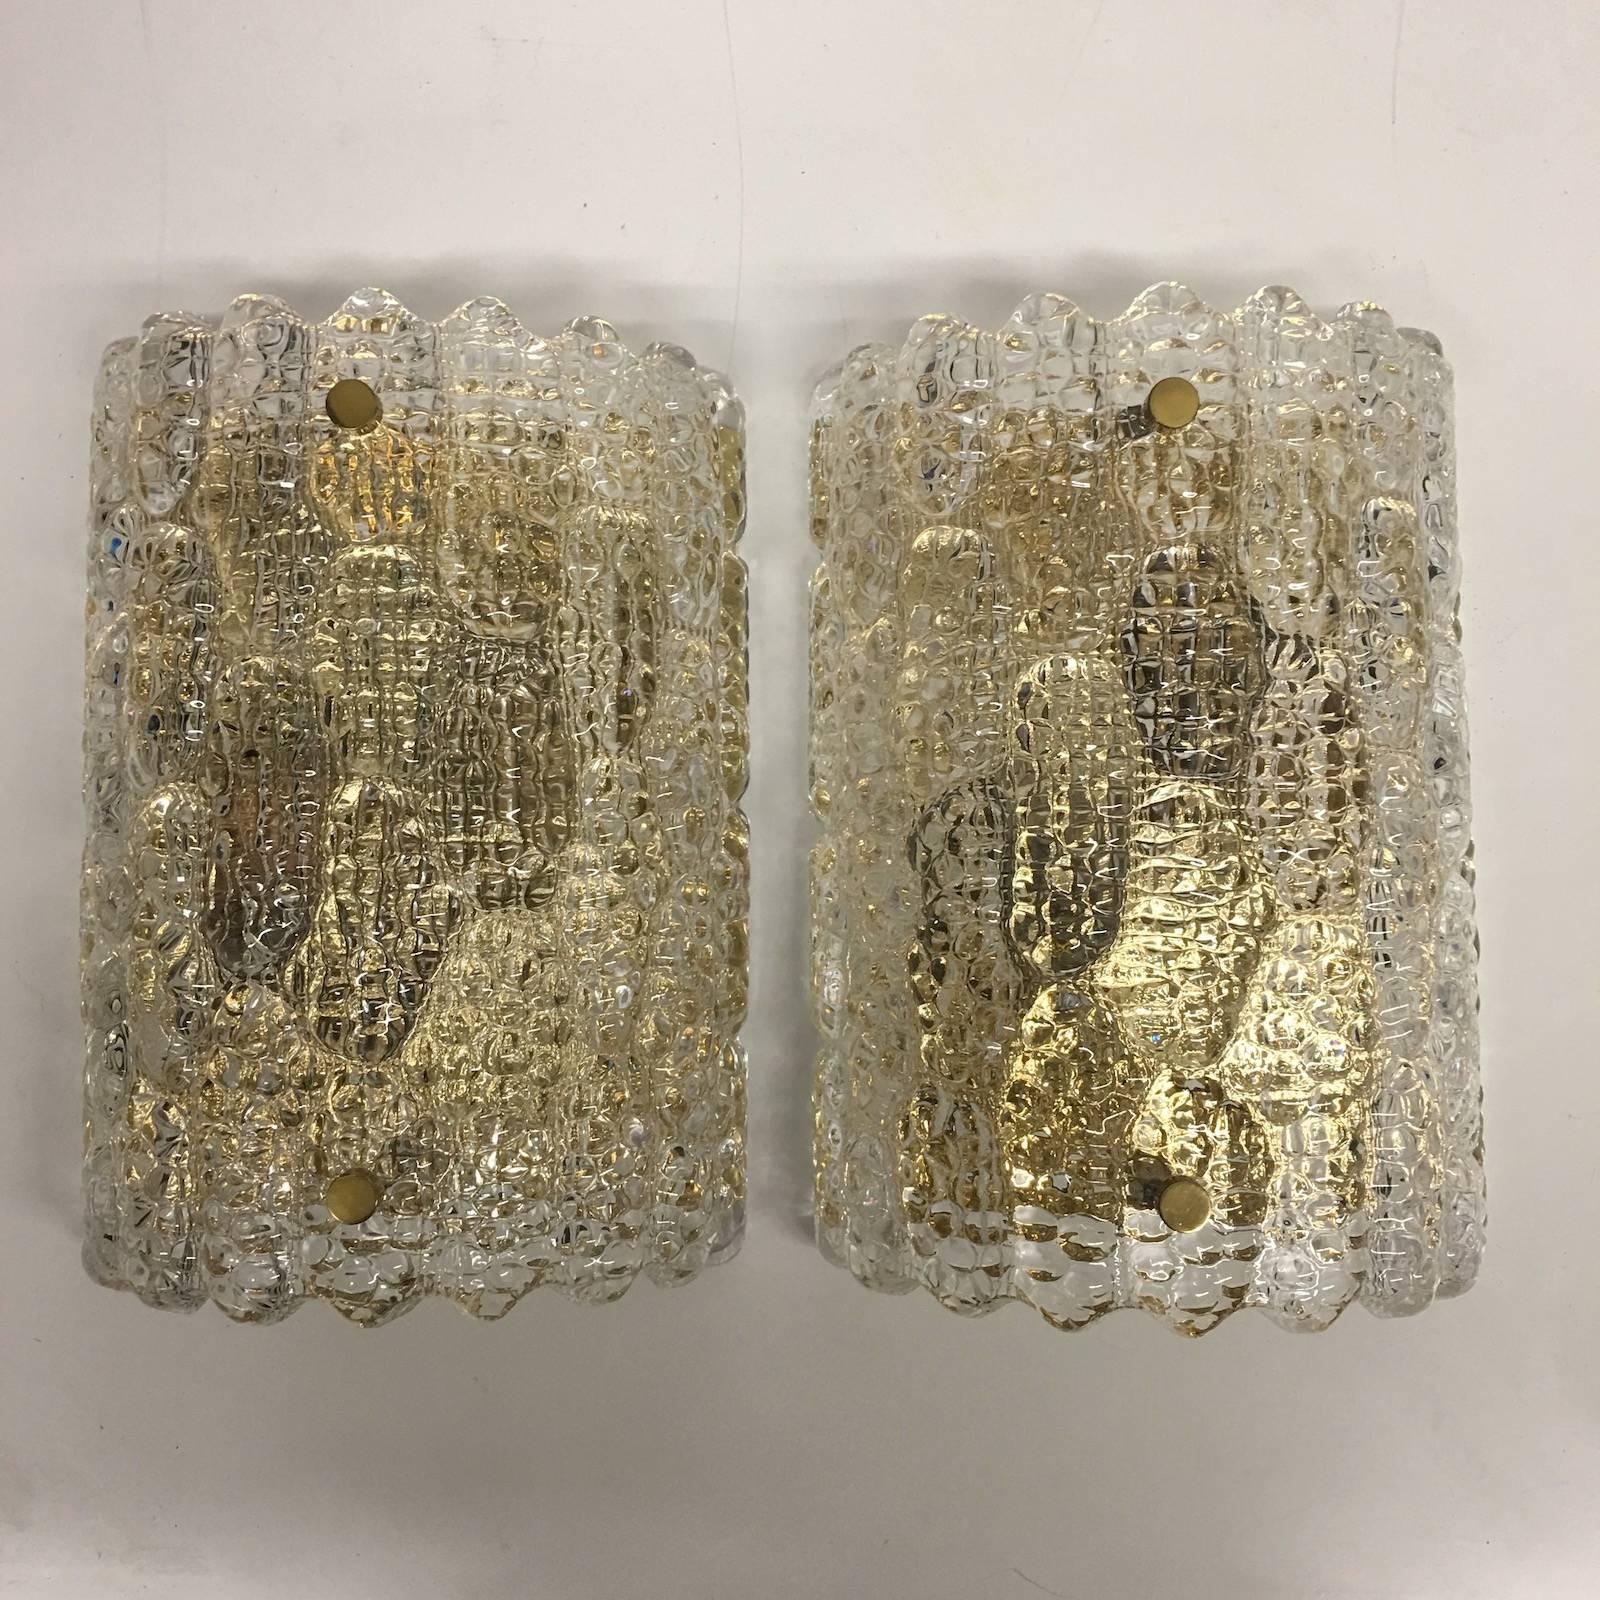 Beautiful sought after Lot of wall sconces by Carl Fagerlund for Orrefors. Pressed textured glass with brass accents mounted on brass wall plates. Each Fixture requires two European E 14 candelabra bulbs, each up to 60 watts. Classy and beautiful